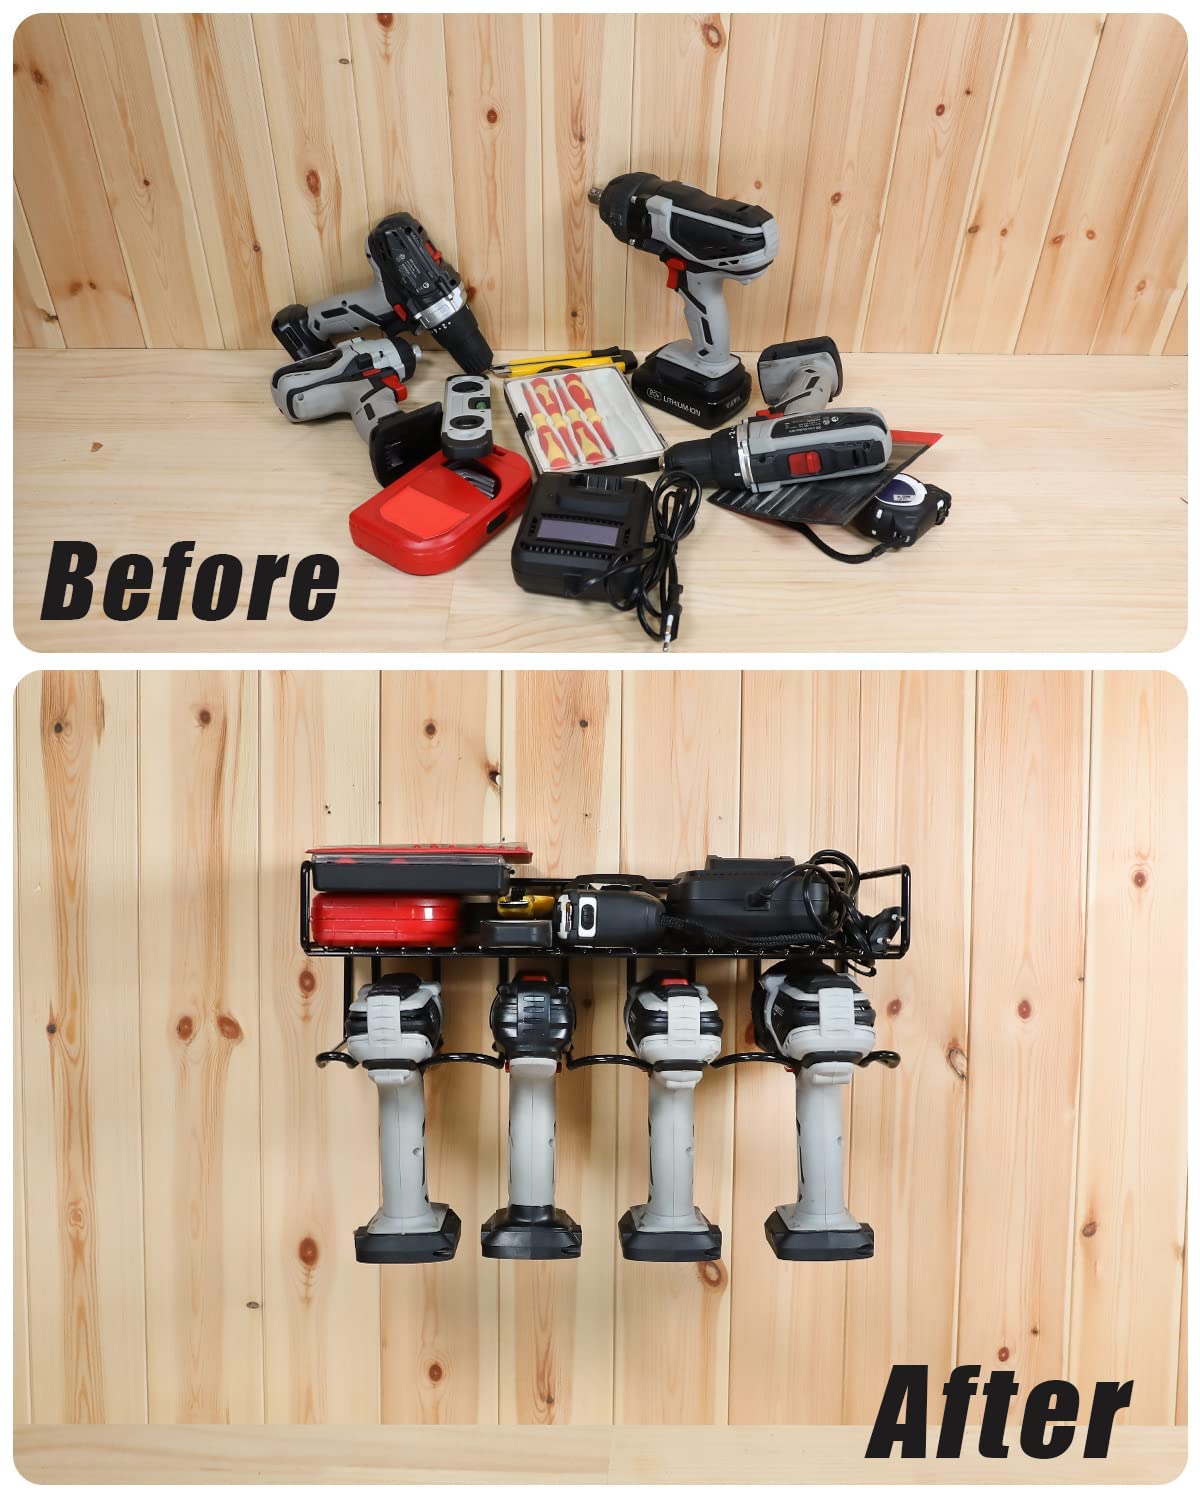 WellMall Garage Organization and Drill Storage - 2 Pack Power Tool Organizer Wall Mount Style, Great for Drill as Tool Utility Shelves / Rack,